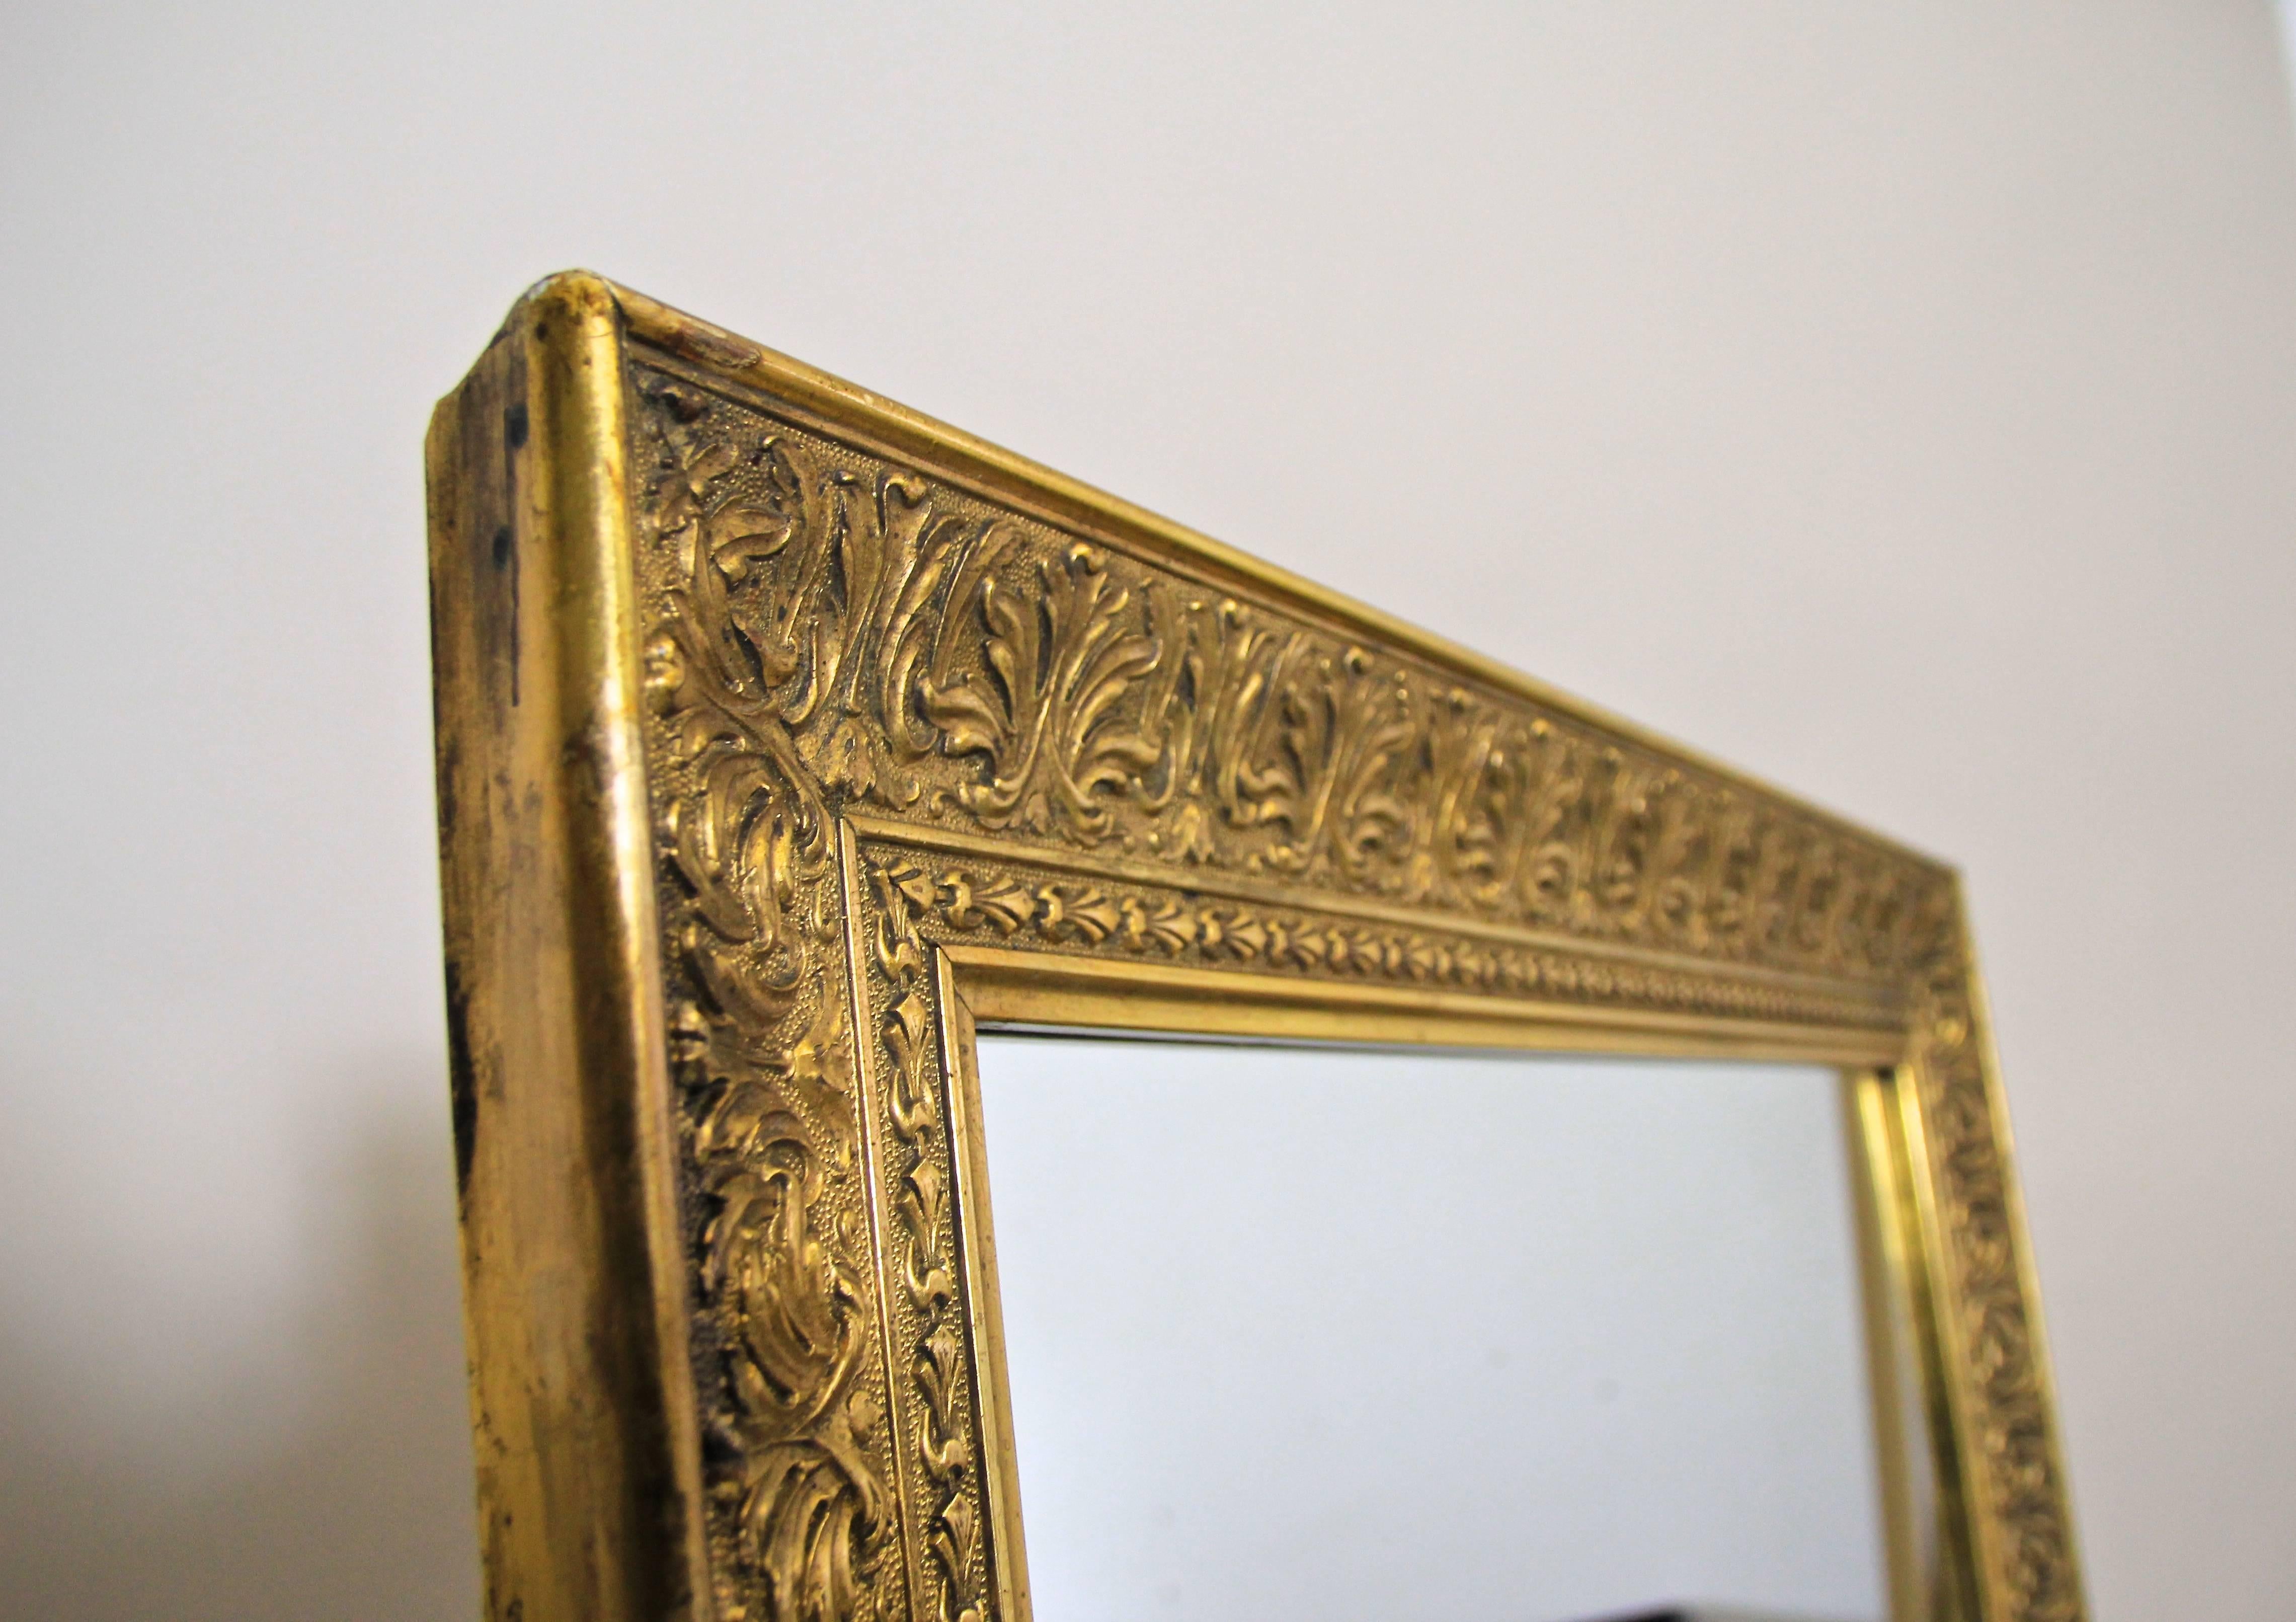 Elegant large golden mirror from Austria made in the early days of the 20th century. The golden frame is covered with Fine composition gold and is richly decorated with beautiful stucco leaf tendrils.
A real eye-catching piece with a nice unique